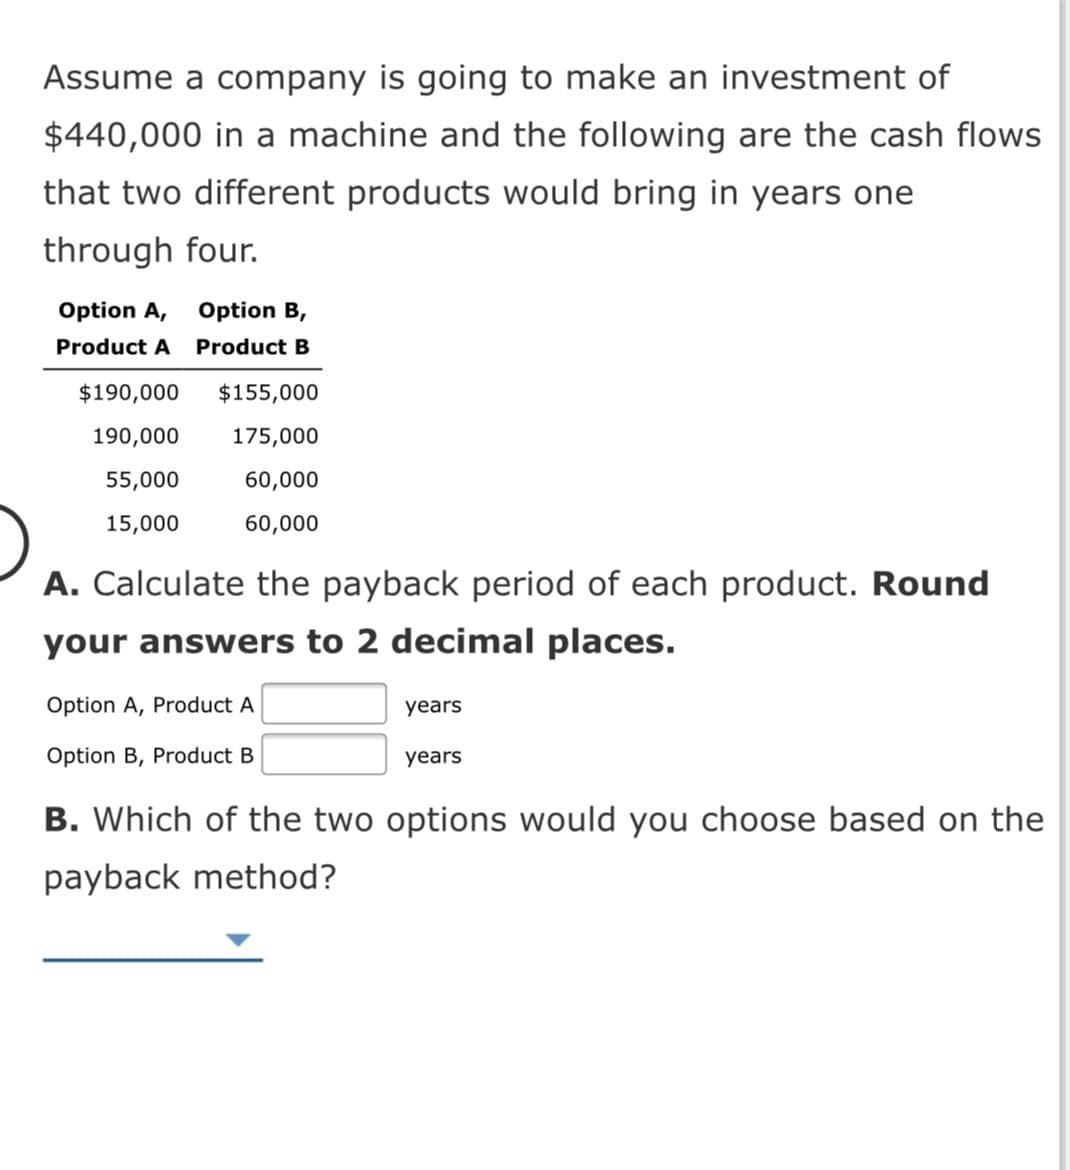 Assume a company is going to make an investment of
$440,000 in a machine and the following are the cash flows
that two different products would bring in years one
through four.
Option A,
Option B,
Product A
Product B
$190,000
$155,000
190,000
175,000
55,000
60,000
15,000
60,000
A. Calculate the payback period of each product. Round
your answers to 2 decimal places.
Option A, Product A
years
Option B, Product B
years
B. Which of the two options would you choose based on the
payback method?
